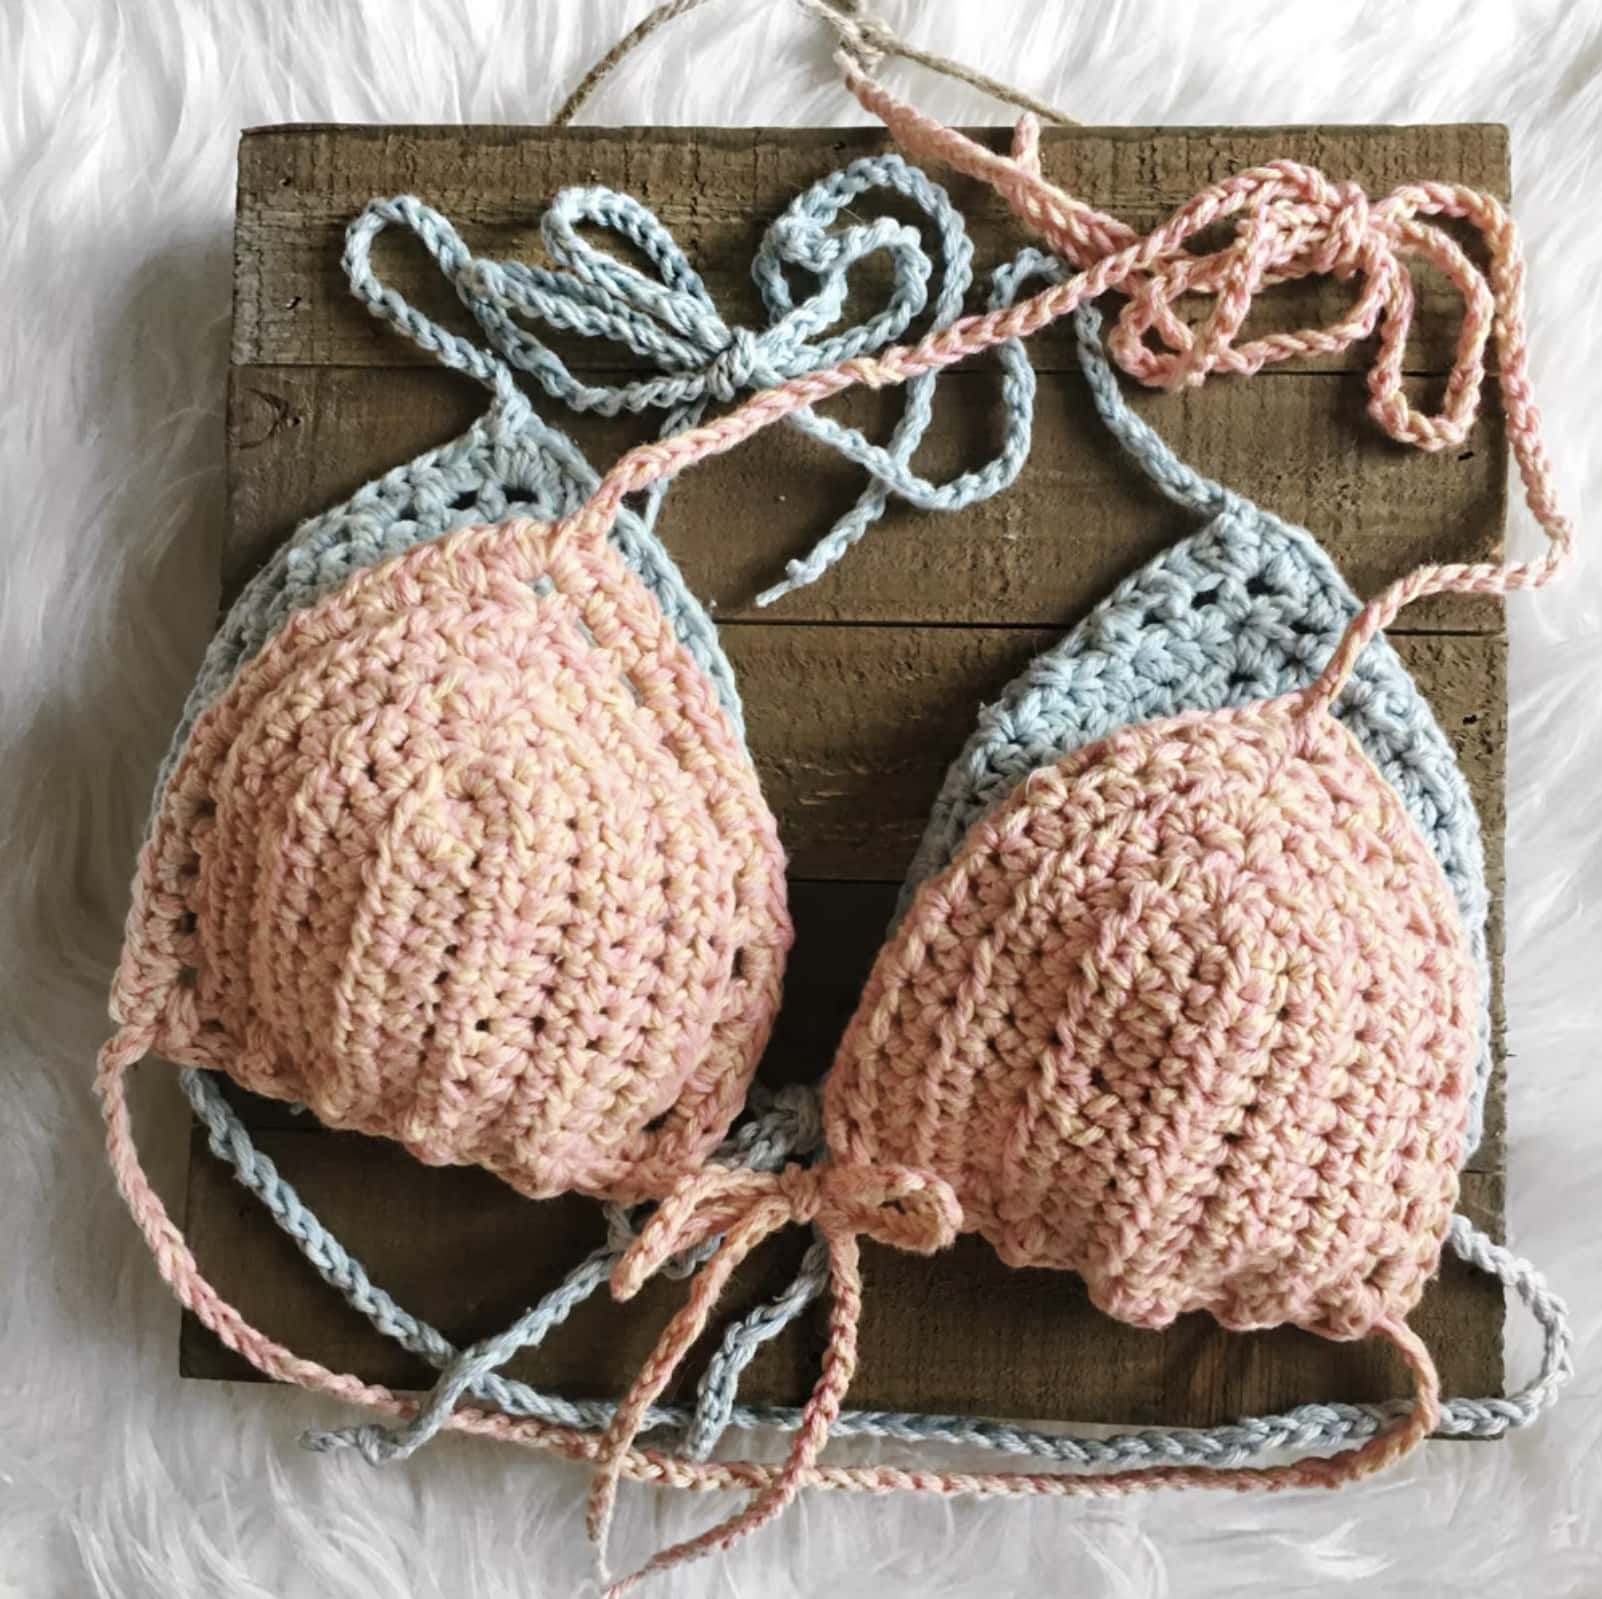 crochet bikini top pattern free from love crafts and perfect for holidays, festivals and warm, summer days. Easy and fun to make. It's just one of 25 beautiful crochet crop top pattern ideas I've shared - with free patterns and projects for crocheters of all levels from beginners upwards. There's something for everyone - hope you enjoy! x